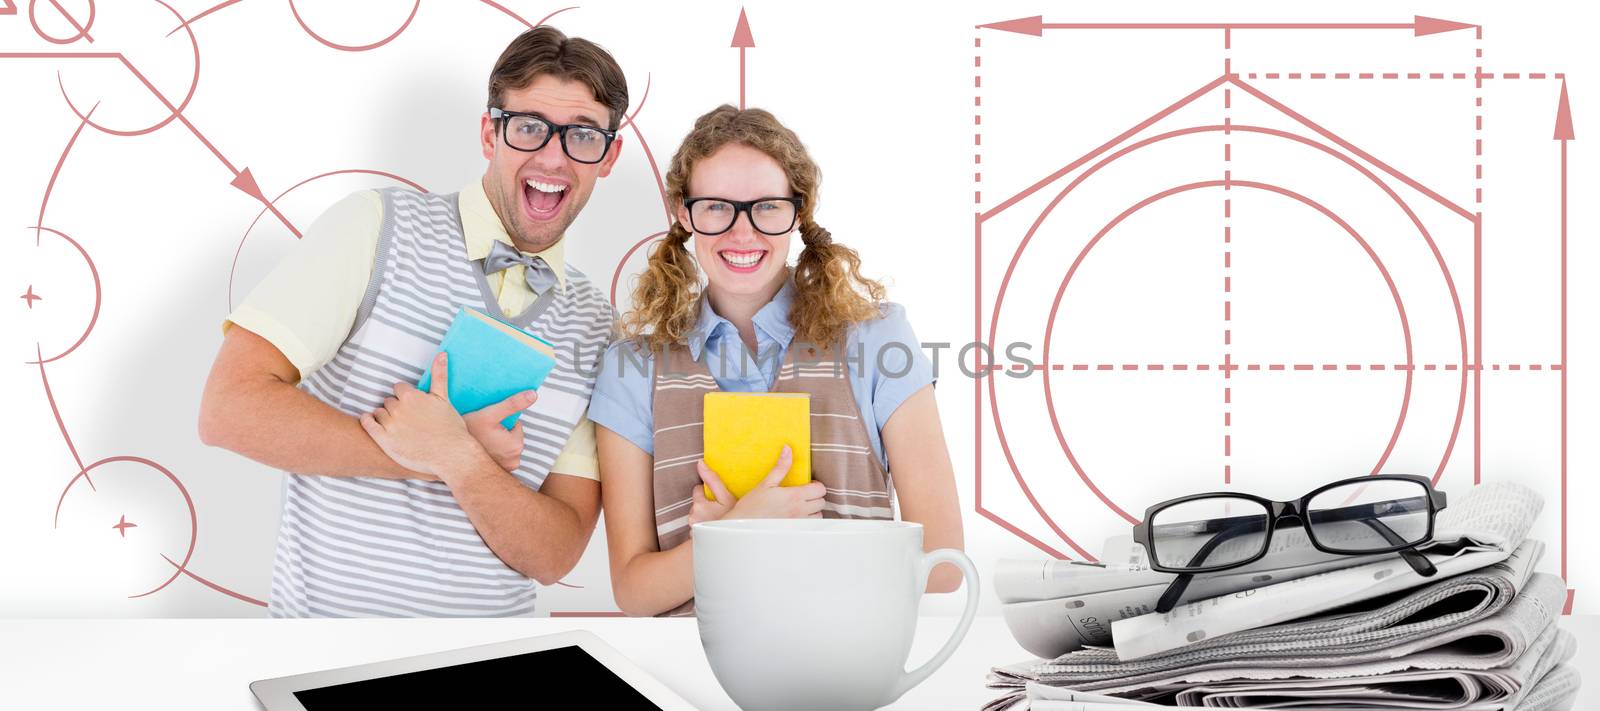 geeky hipster couple holding books and smiling at camera  against blueprint